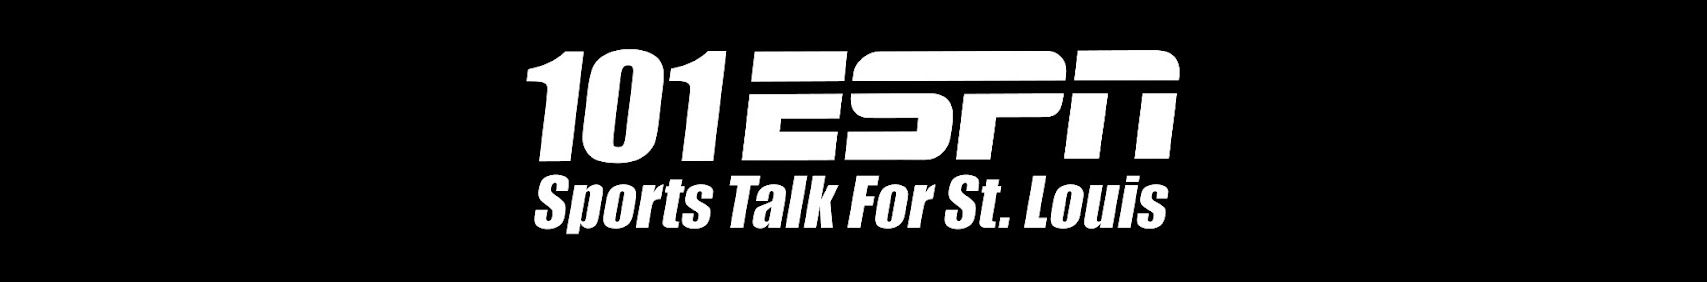 101 ESPN - Sports Talk for St. Louis - Page 6